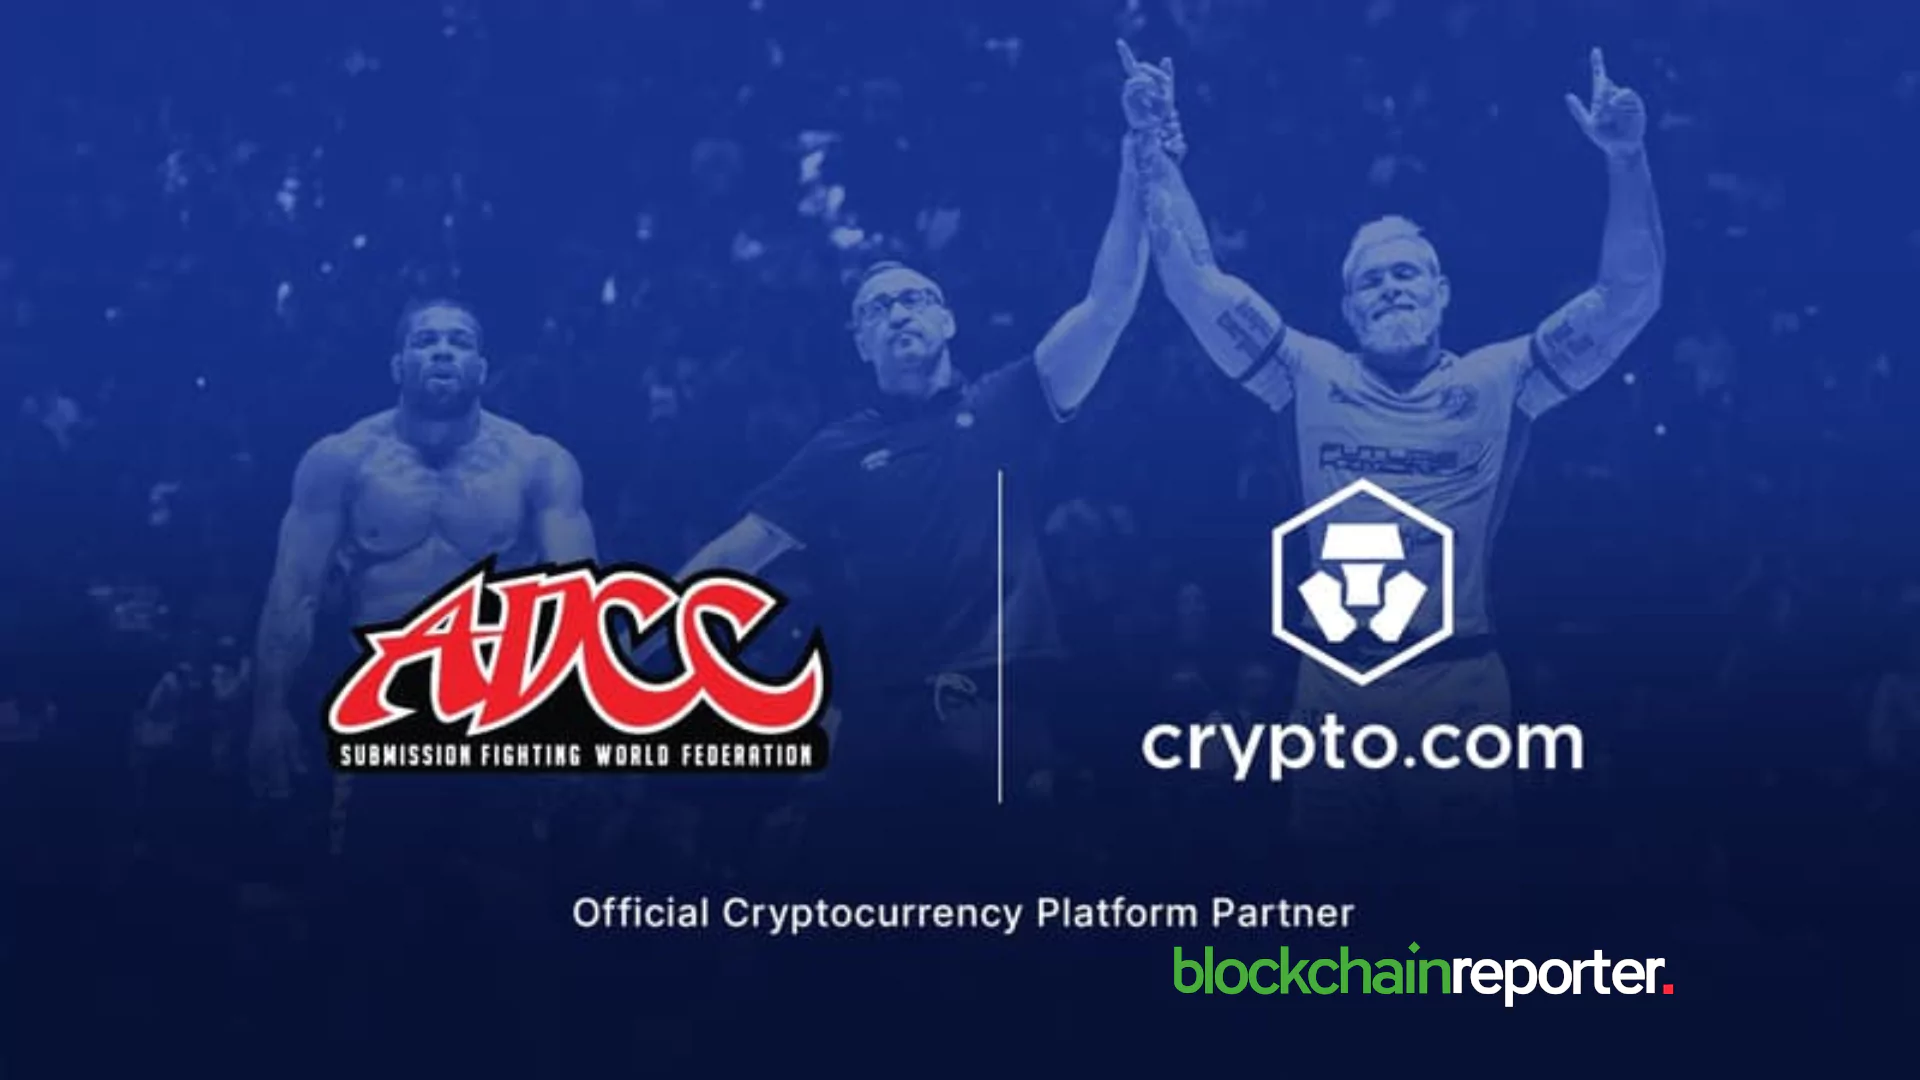 Crypto.com Partners with ADCC for Premier Submission Fighting Event in 2024